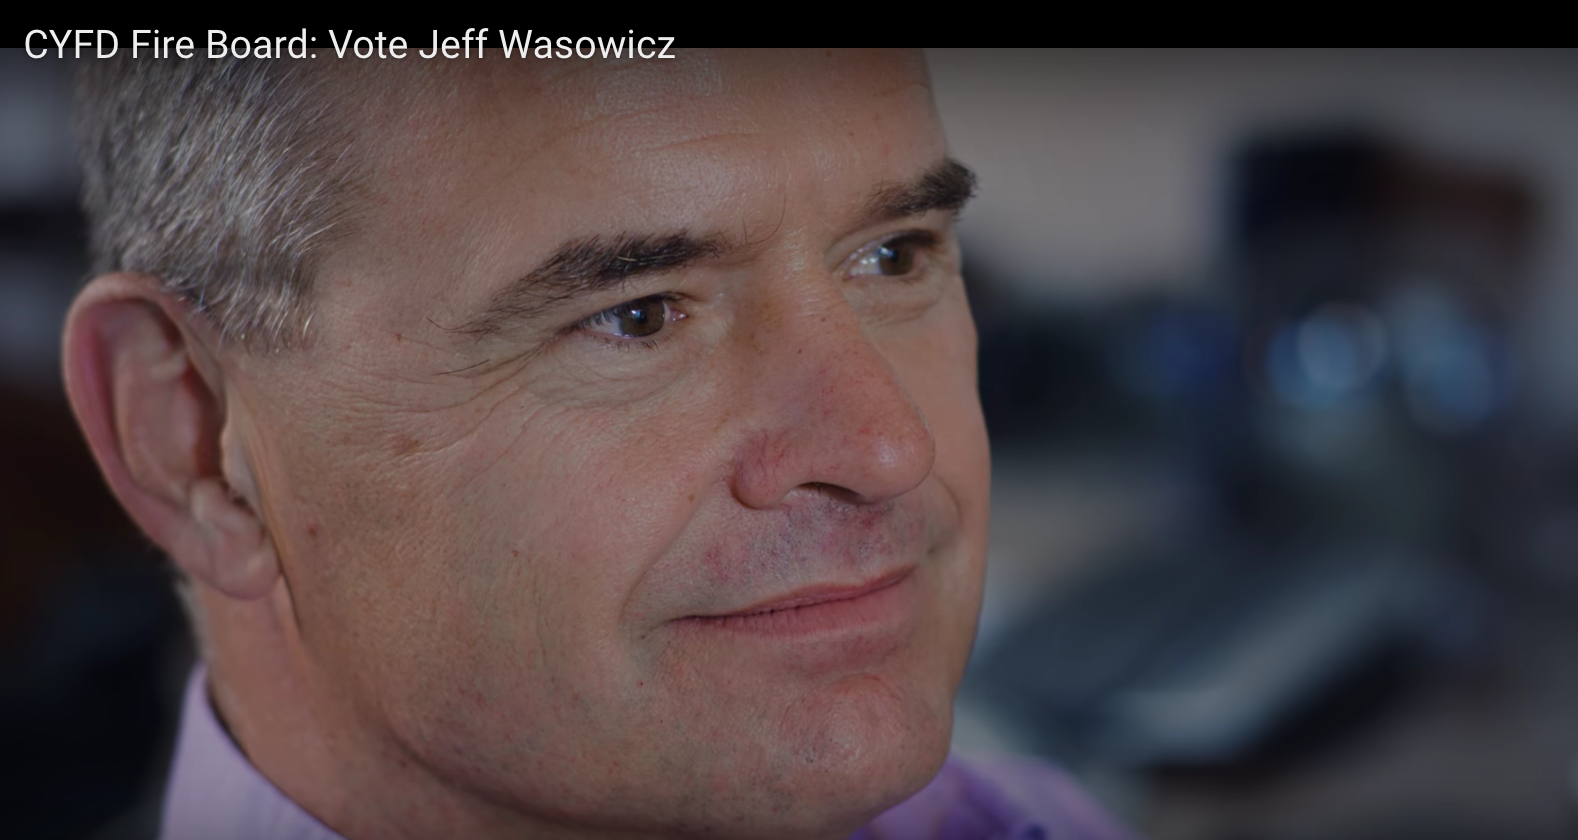 Jeff Wasowicz, Candidate for CYFD Board of Directors